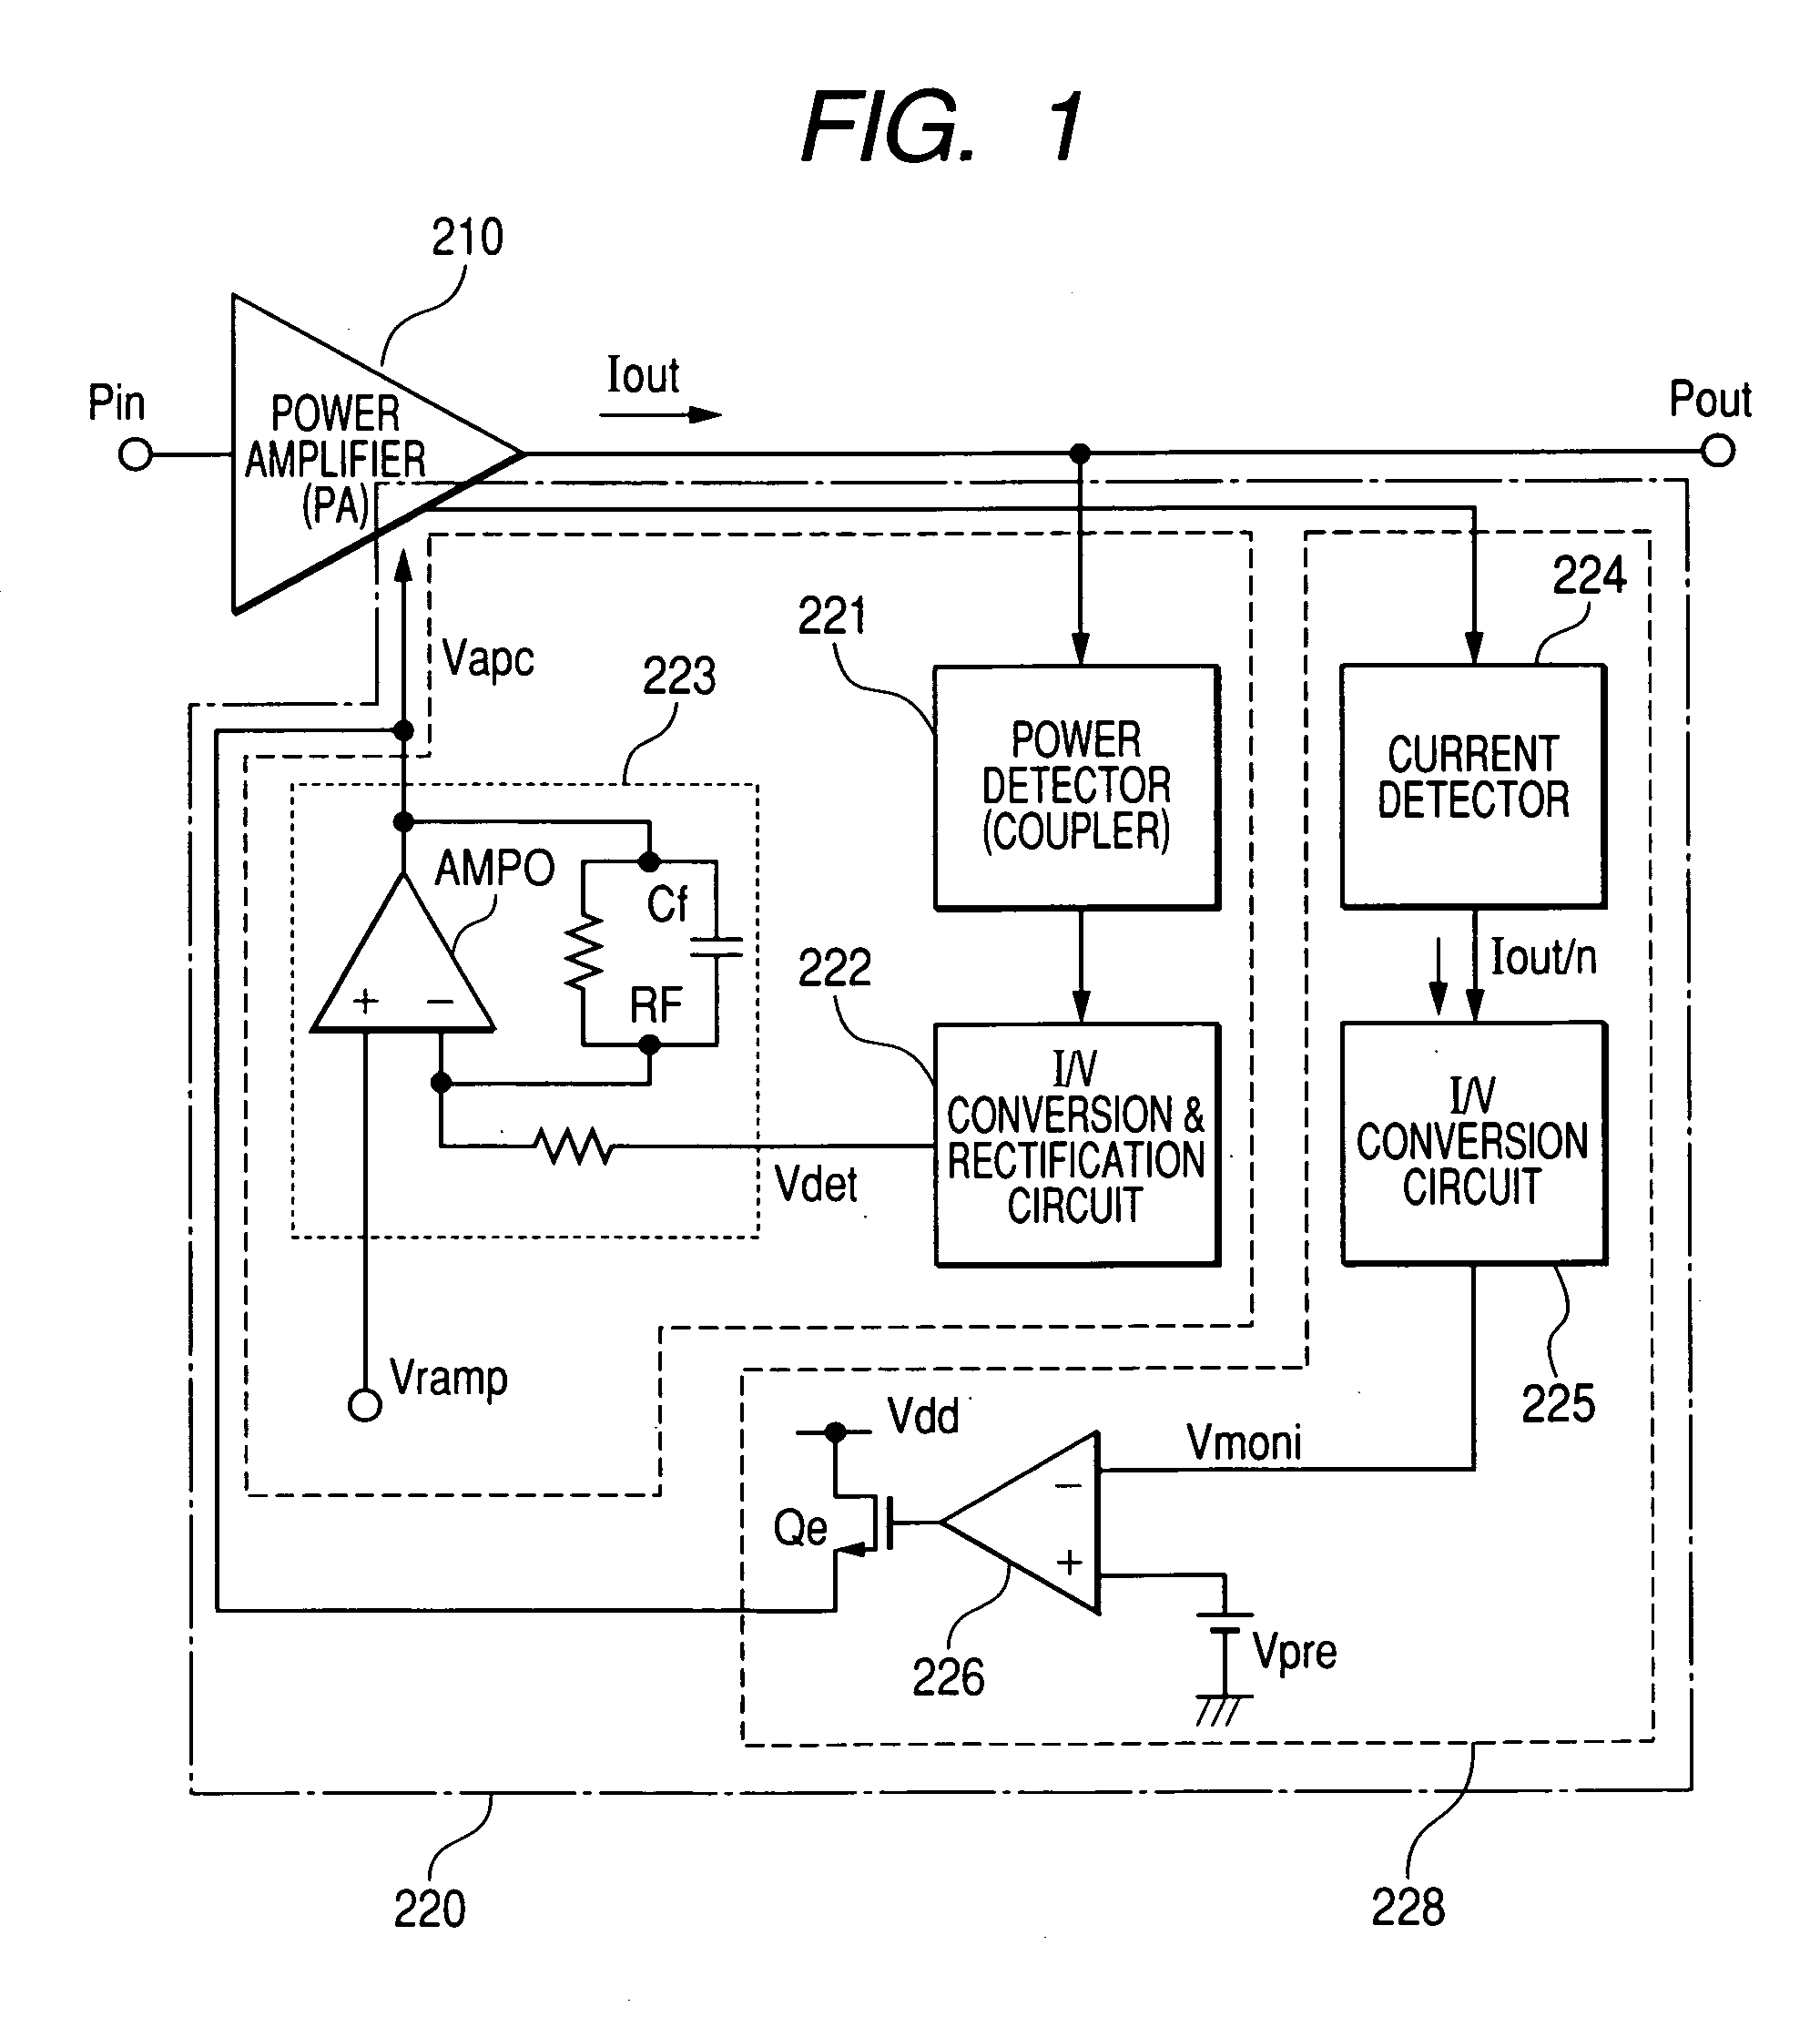 Electronics parts for high frequency power amplifier